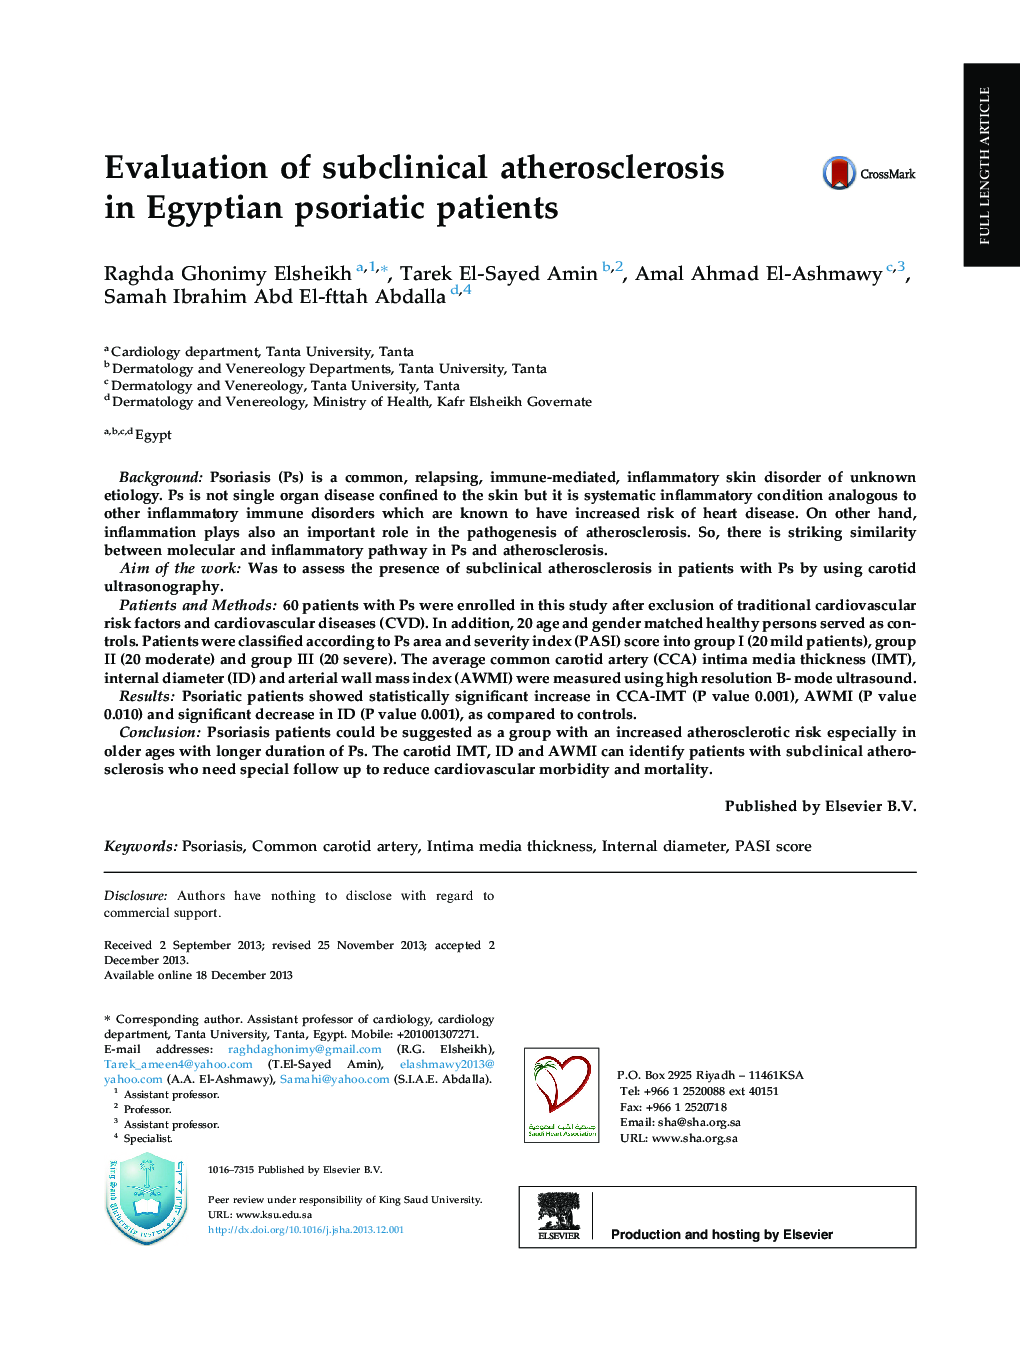 Evaluation of subclinical atherosclerosis in Egyptian psoriatic patients 